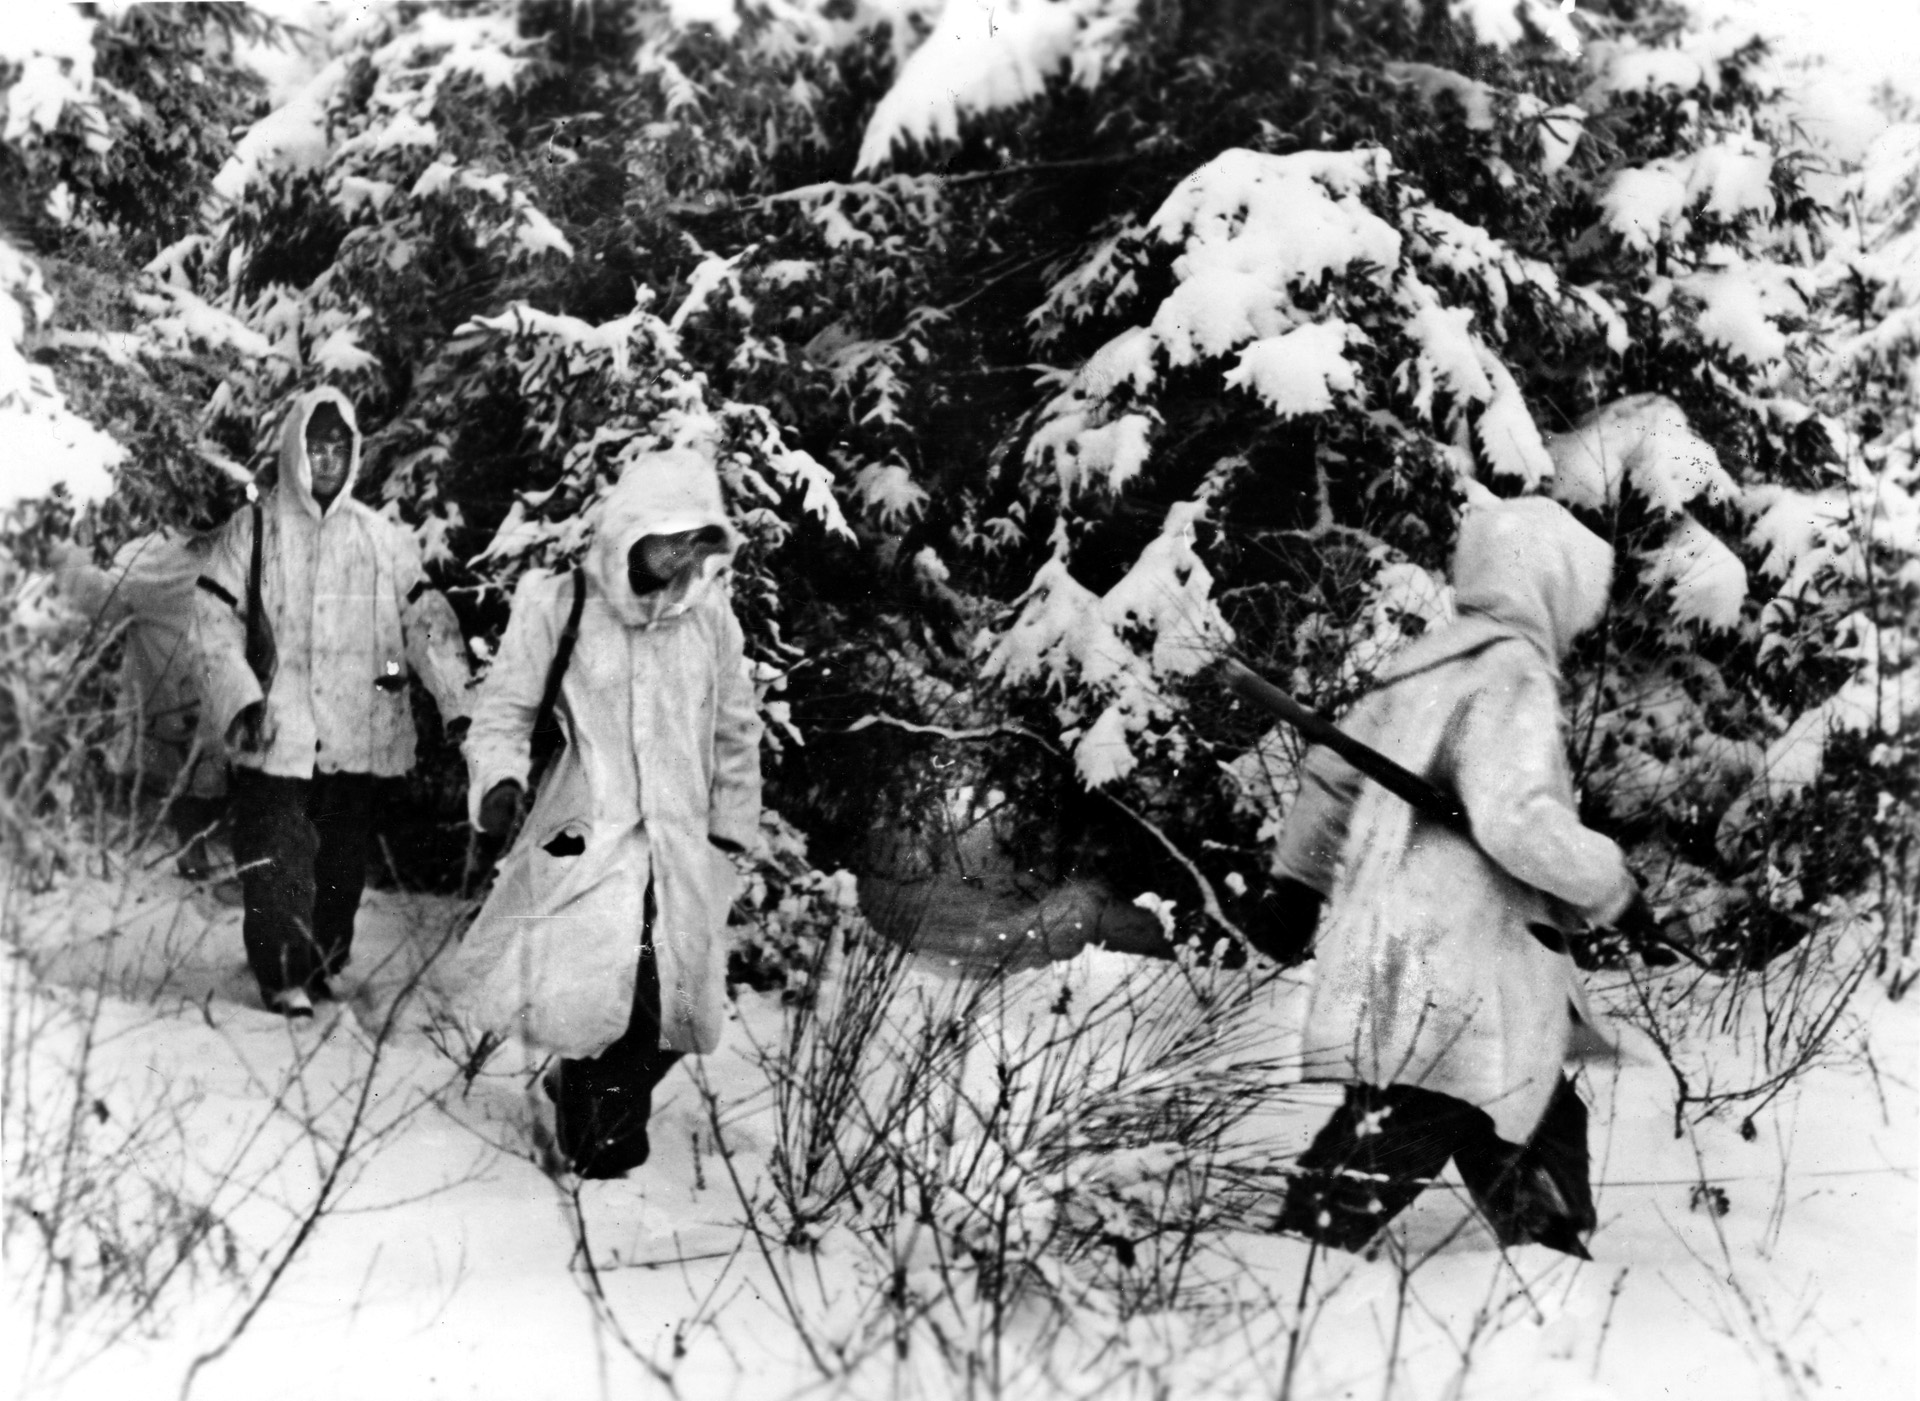 A German scouting party, dressed in white camouflage smocks, moves through a snowy forest. Clifford Savage, 99th Infantry Division, recalled seeing Germans wearing “white bedsheets” during the attack.